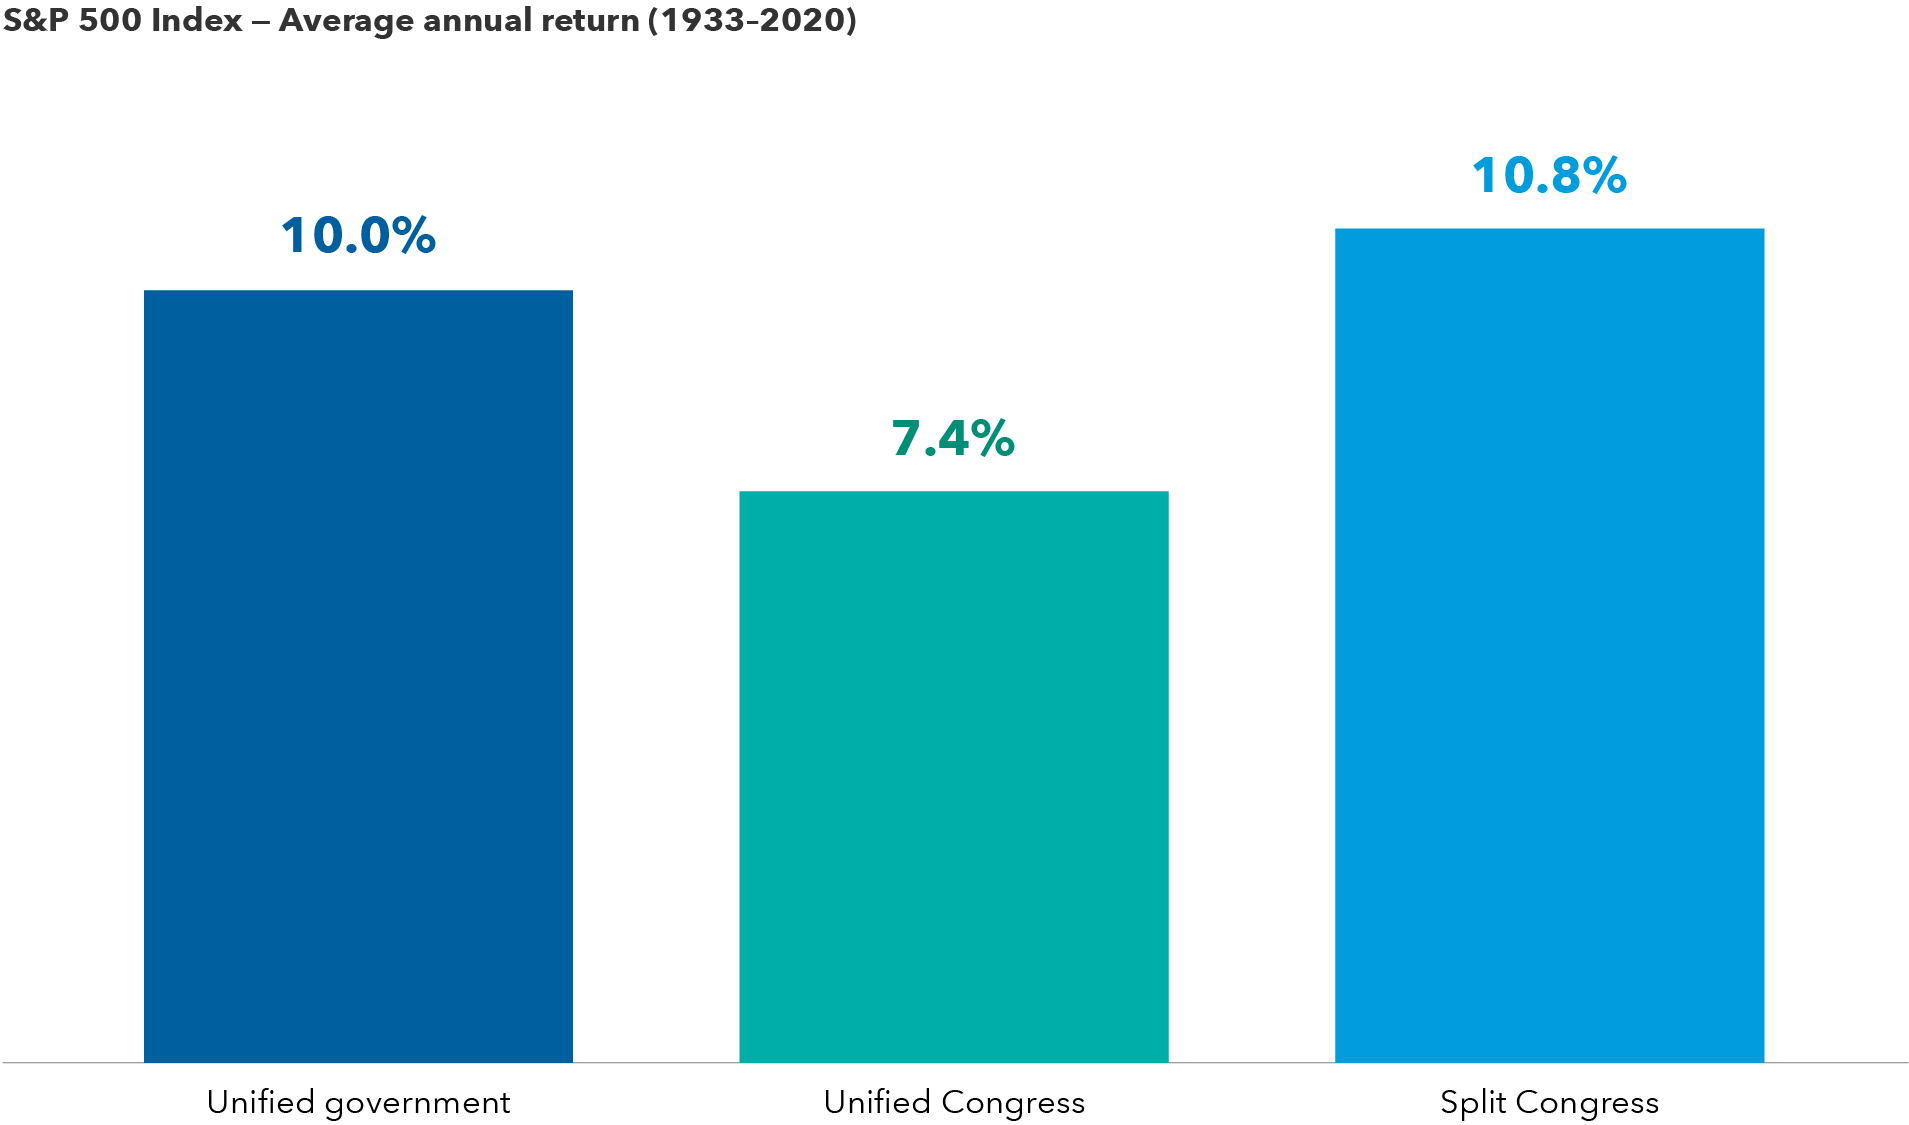 The image shows the average annual return for the S&P 500 Index from 1933 to December 31, 2020, under a unified U.S. government (10.0%), a unified Congress with the president in another party (7.4%) and a split Congress (10.8%). Unified government indicates White House, House and Senate are controlled by the same political party. Unified Congress indicates House and Senate are controlled by the same party, but the White House is controlled by a different party. Split Congress indicates House and Senate are controlled by different parties, regardless of White House control. Sources: Capital Group, Strategas. As of December 31, 2020.